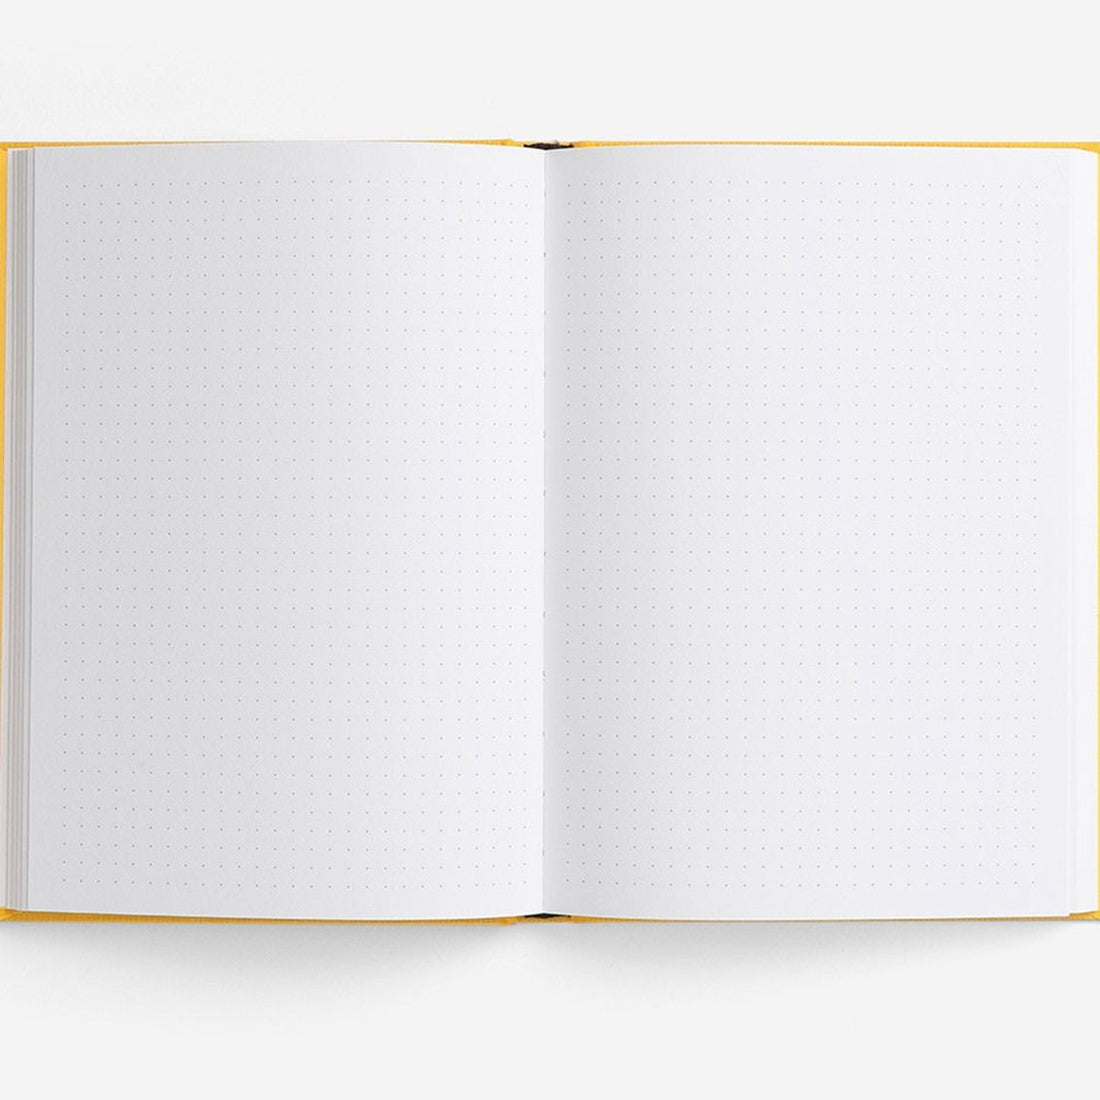 Projects Notebook, The School of Life